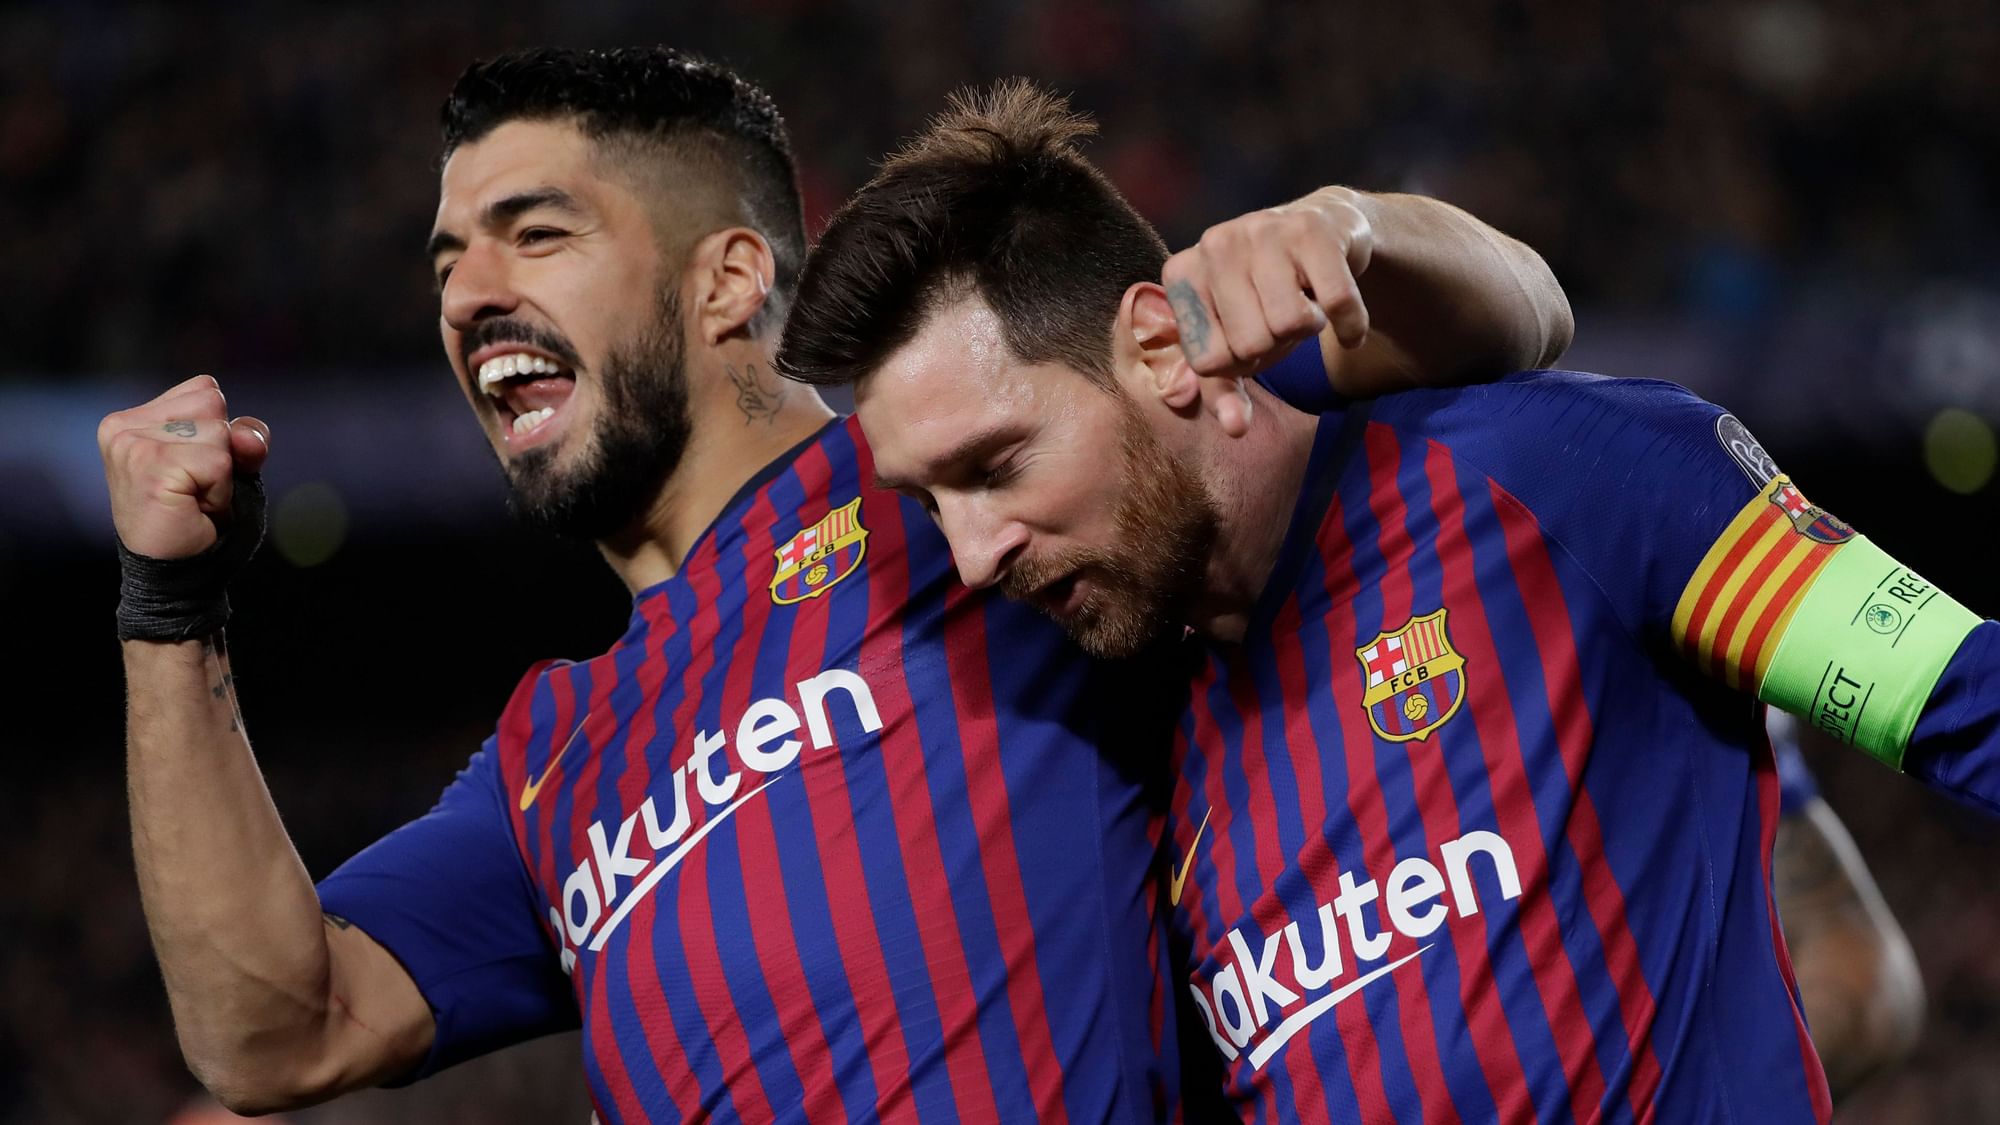 Barcelona’s Lionel Messi, right and Barcelona’s Luis Suarez celebrate after Messi scored his side’s third goal during the Champions League Round of 16, 2nd leg match between FC Barcelona and Olympique Lyon at the Camp Nou stadium.